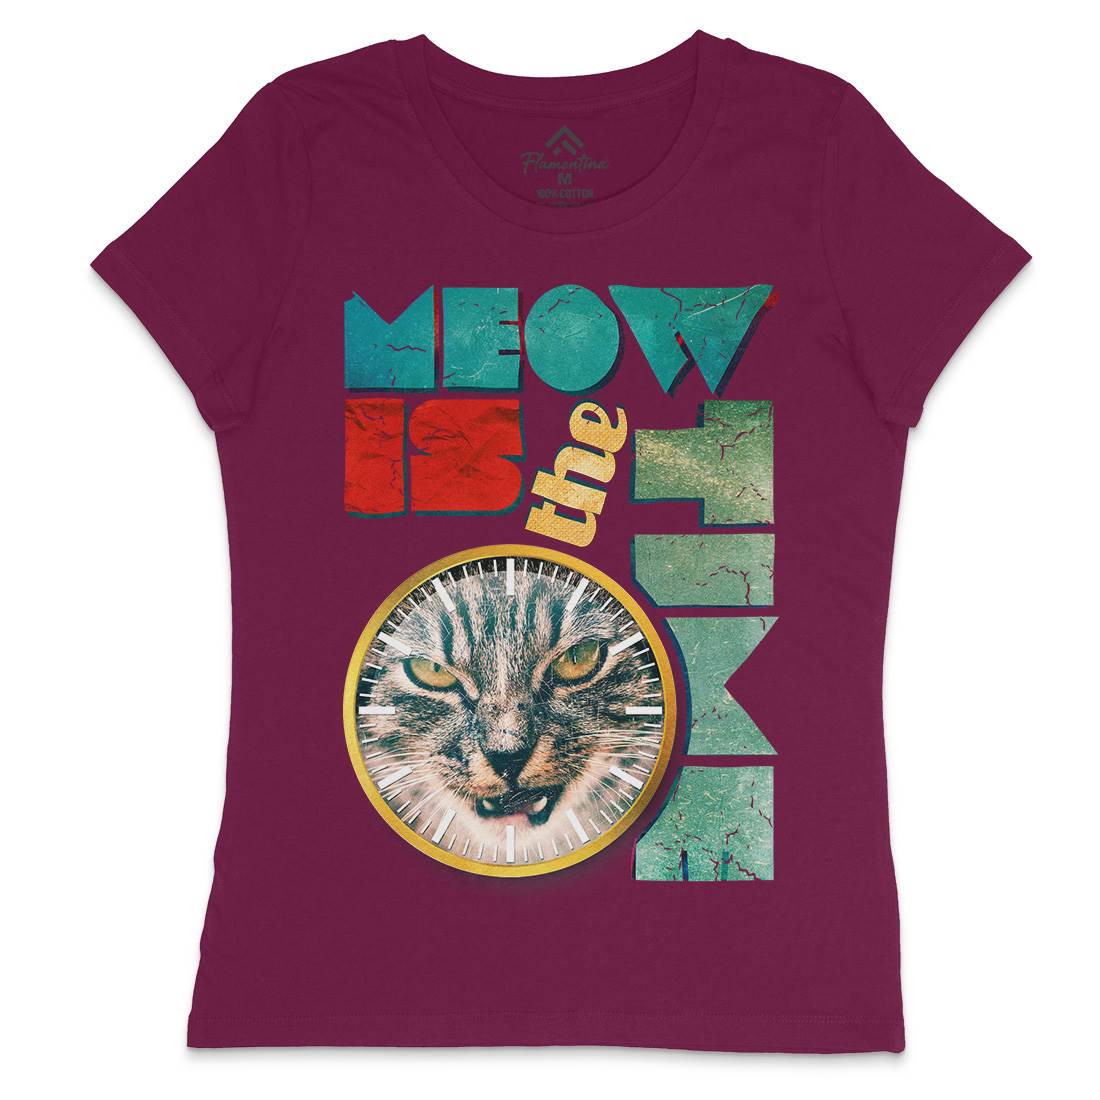 Meow Is The Time Womens Crew Neck T-Shirt Animals A876